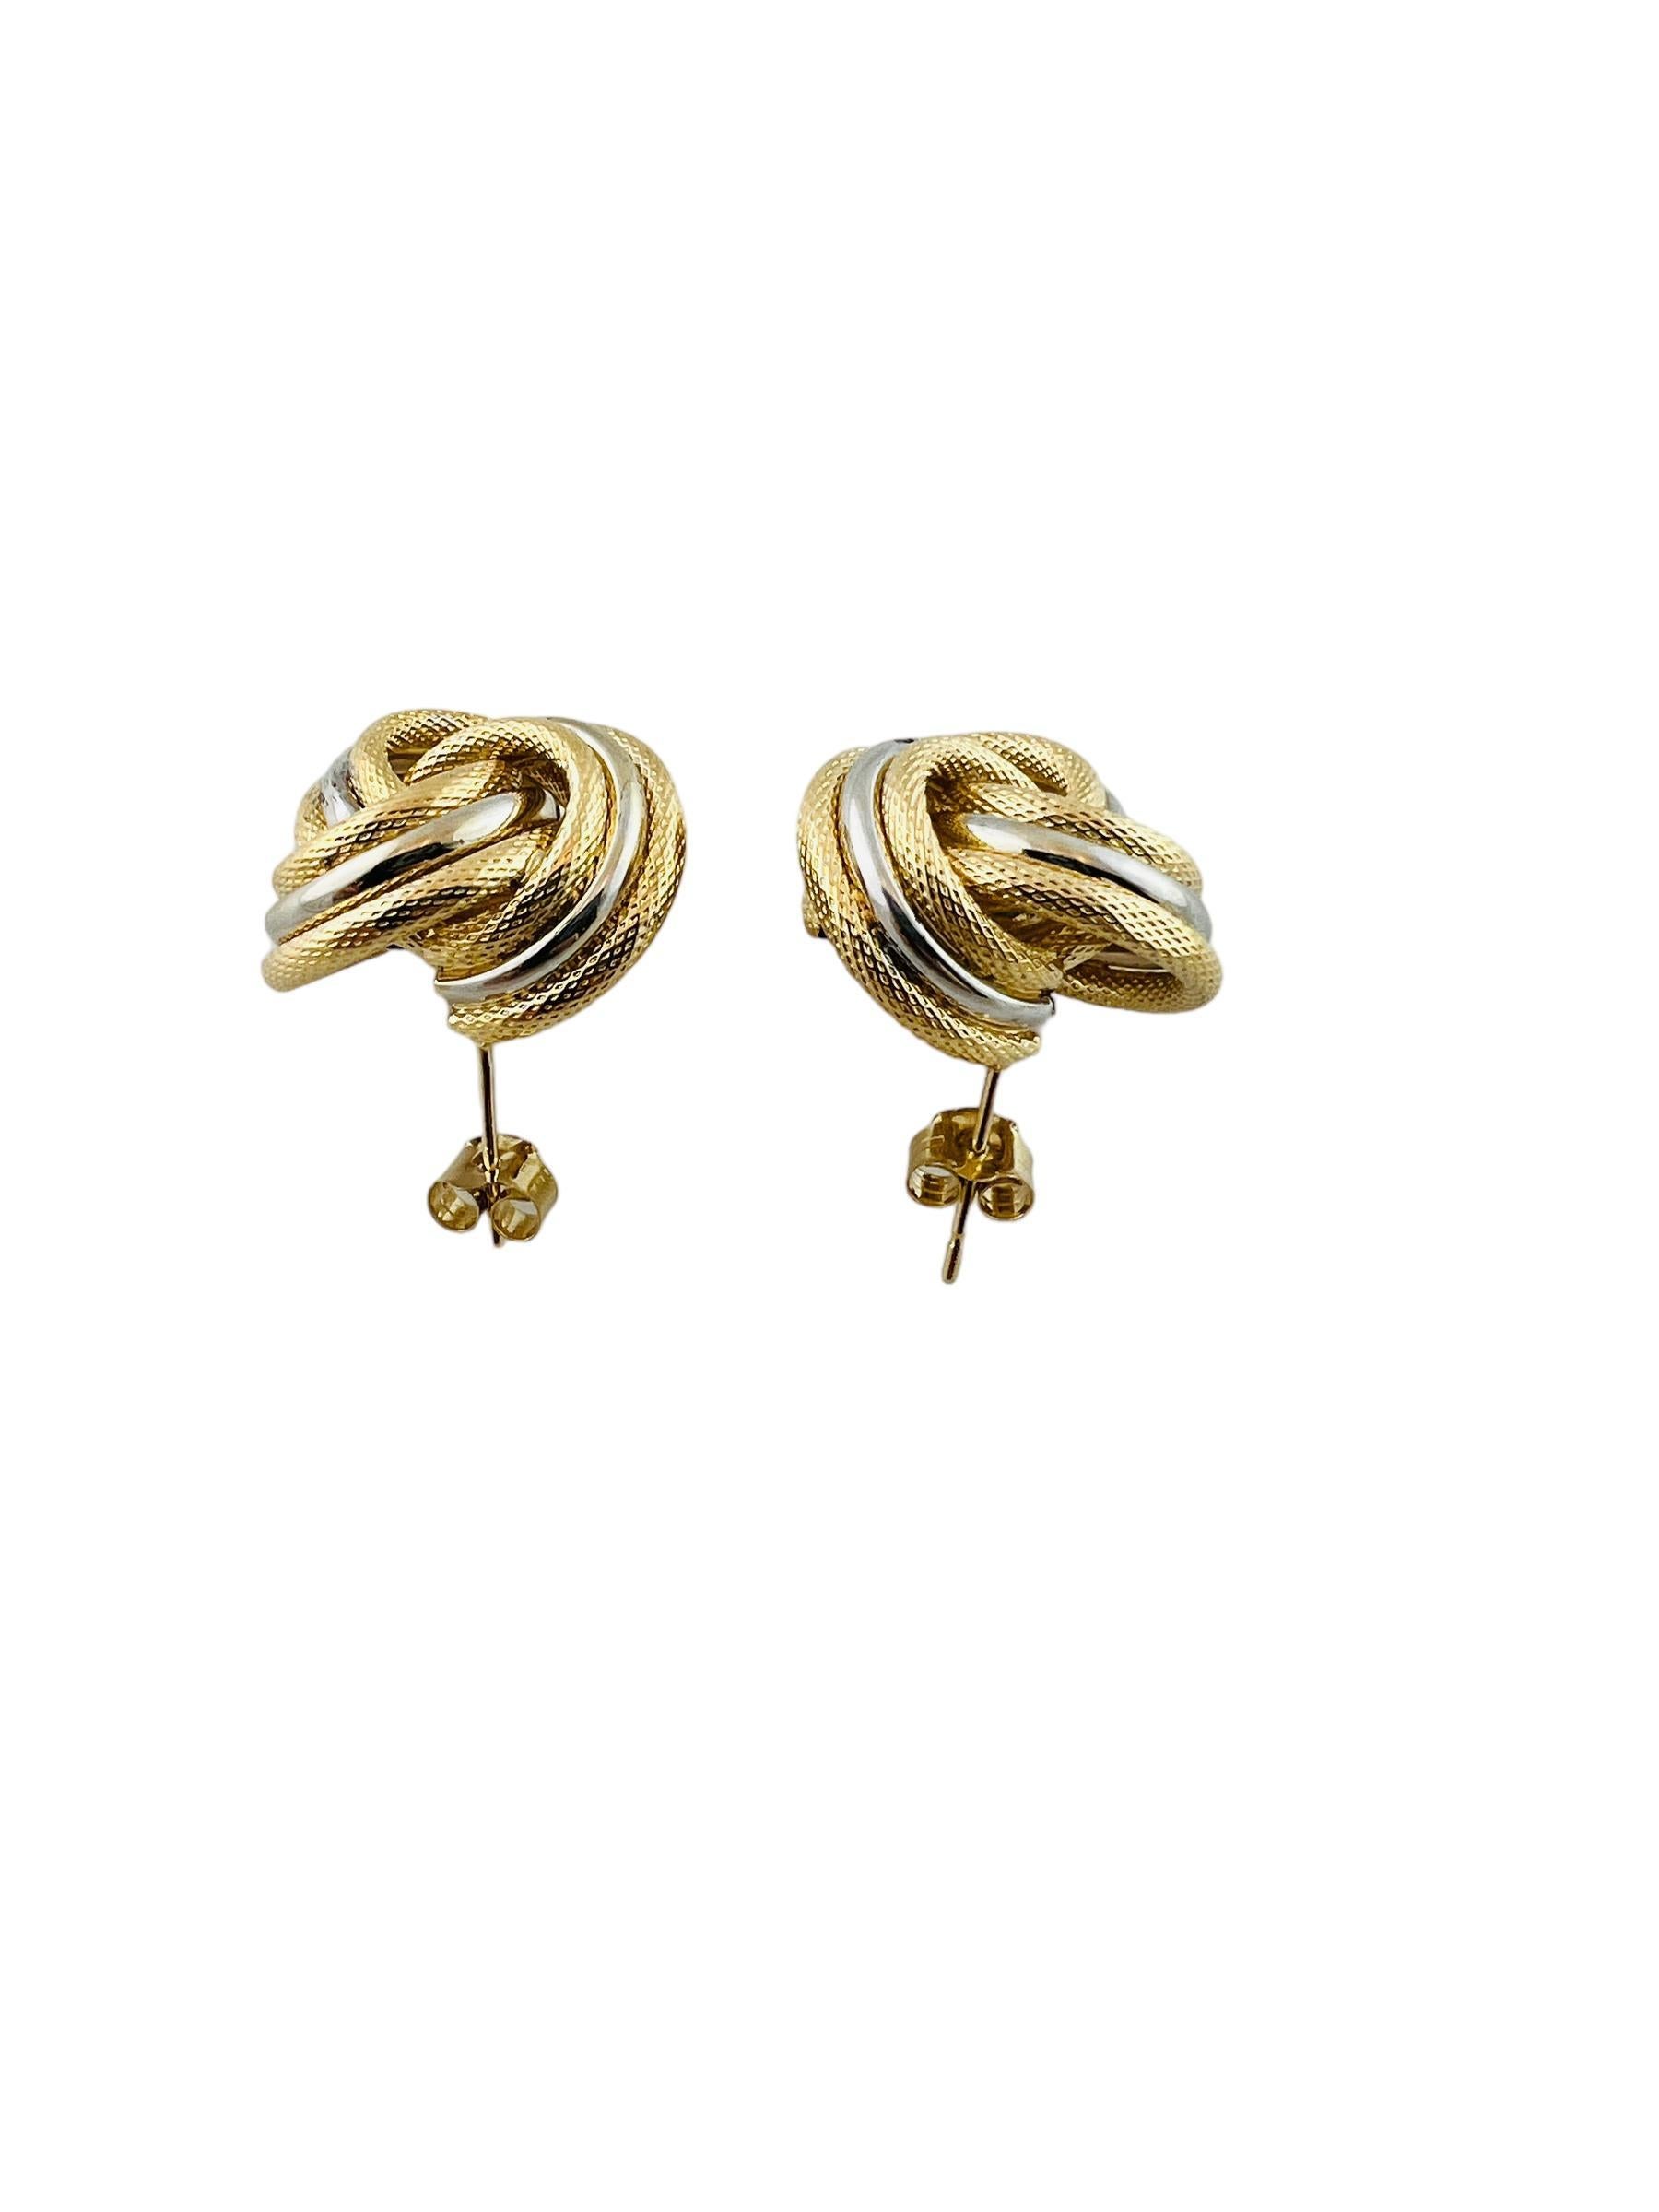 Vintage 14K Yellow & White Gol Two Tone Knot Earrings

Gorgeous set of knot earrings with a beautiful two toned pattern crafted from 14K white and yellow gold!

Size: 16.9mm (.67